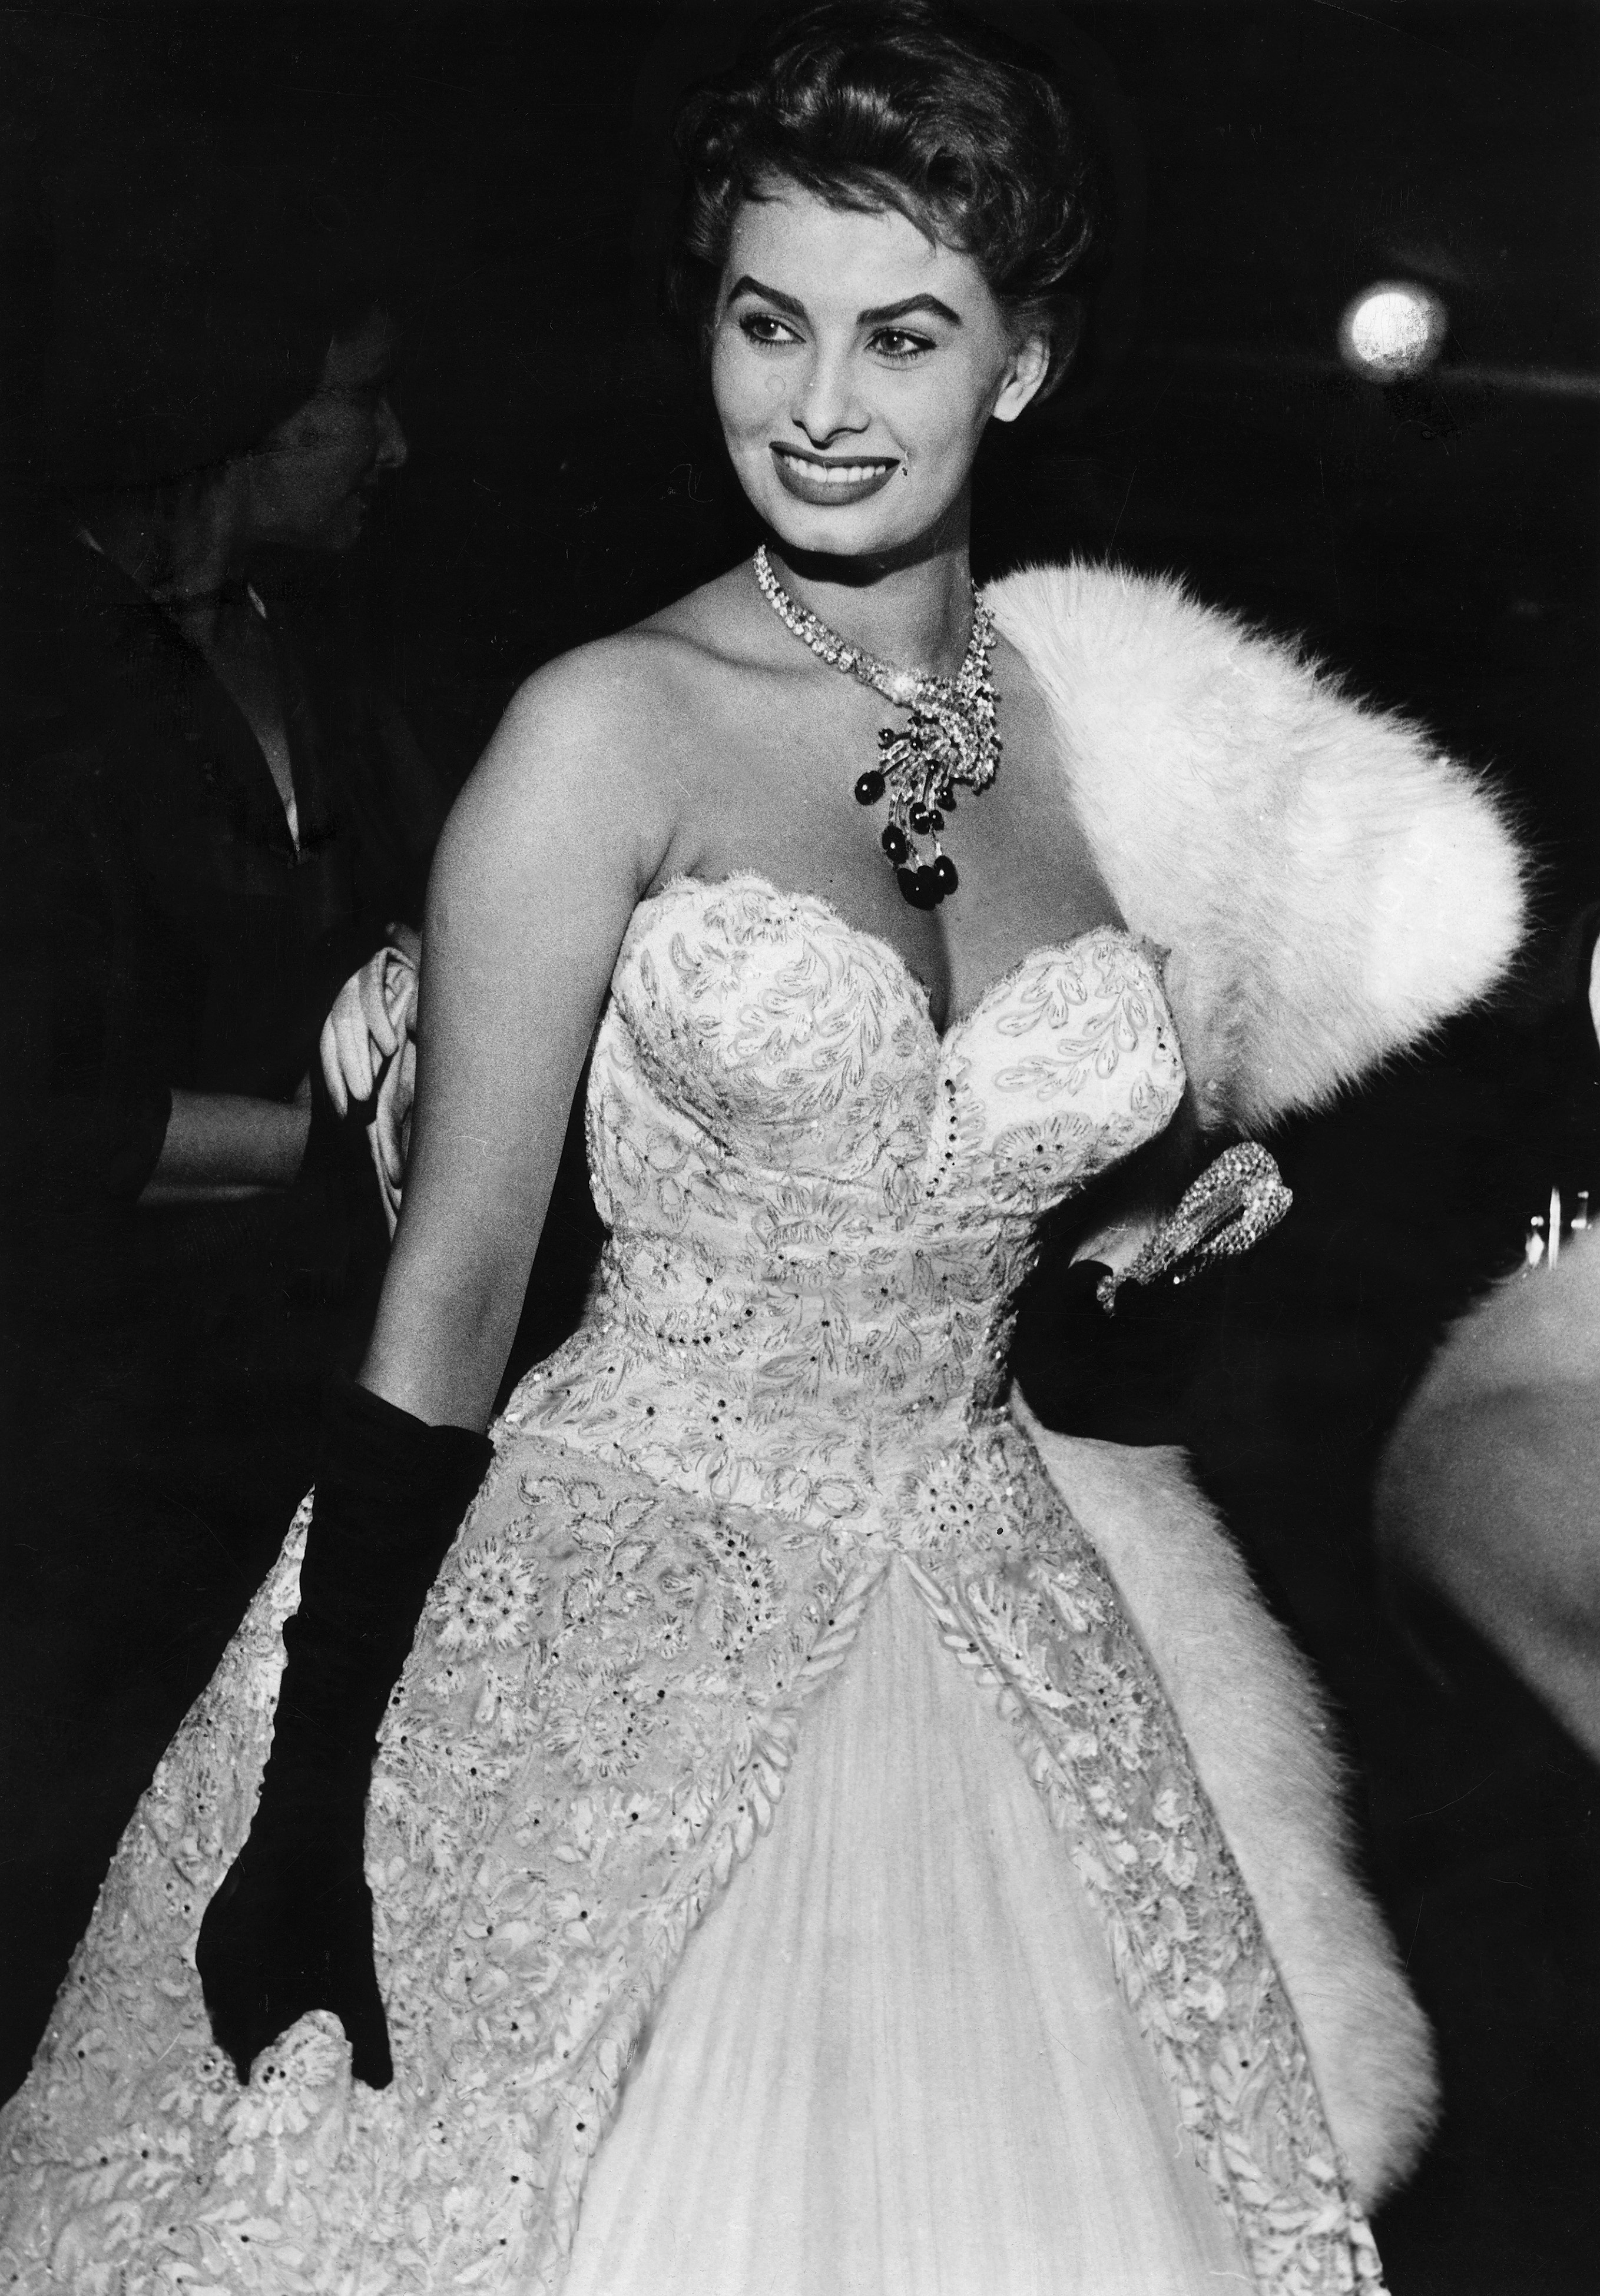 sophia loren wearing a strapless gown with black elbow-length gloves at the cannes film festival